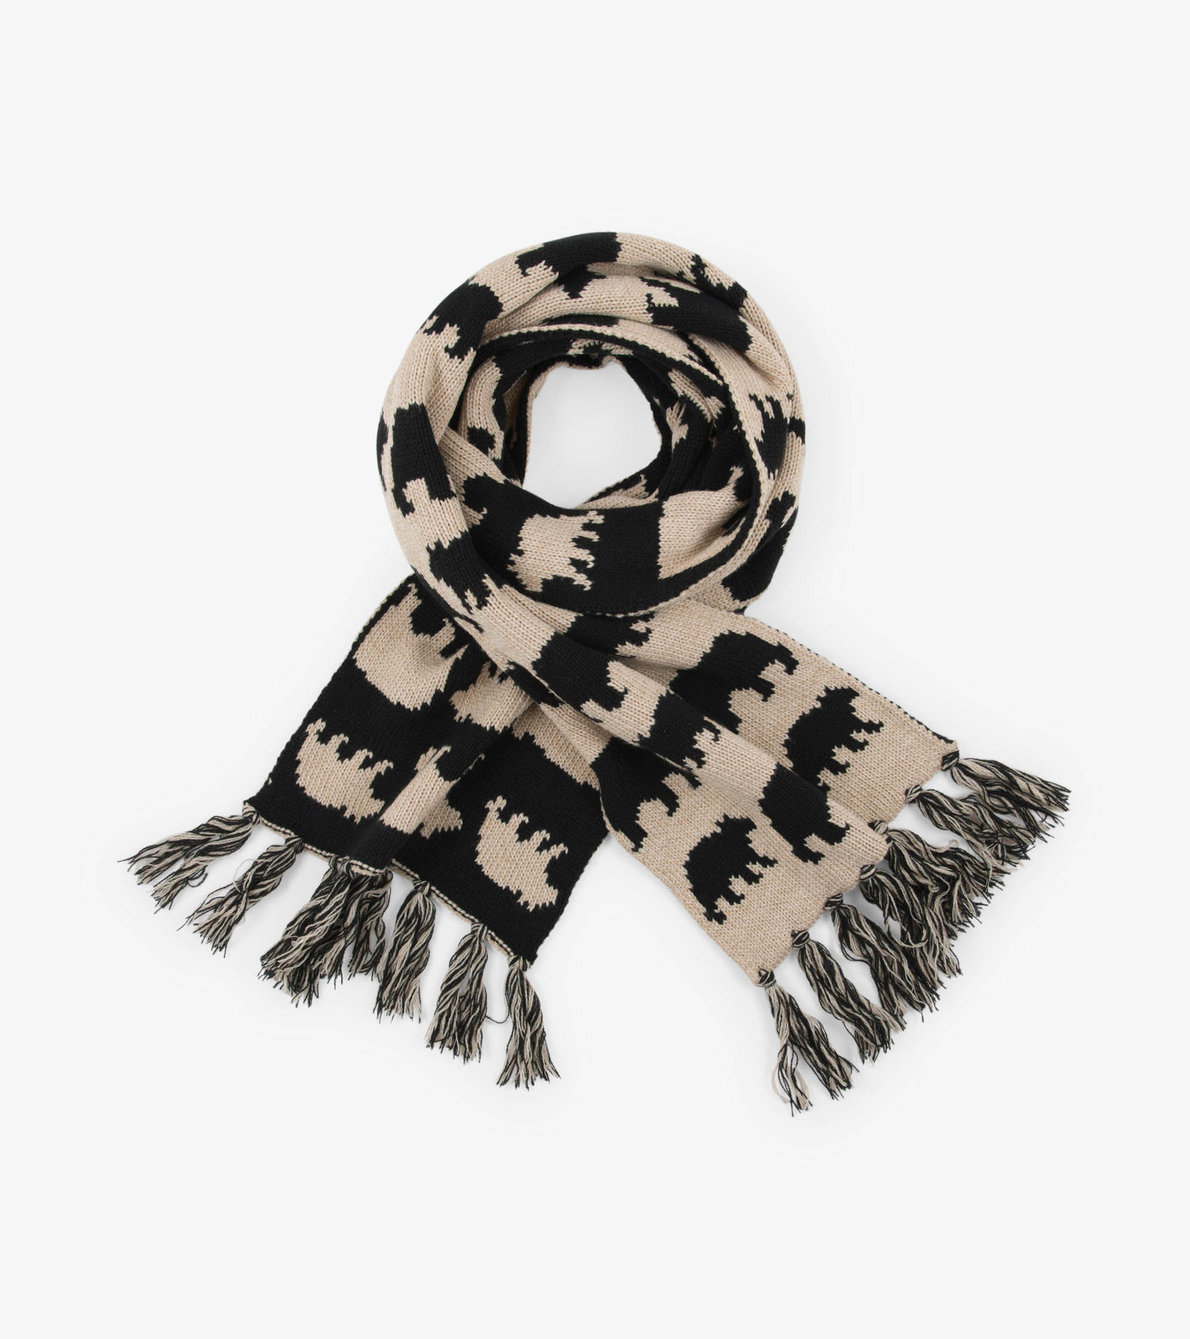 View larger image of Black Bear Adult Heritage Scarf